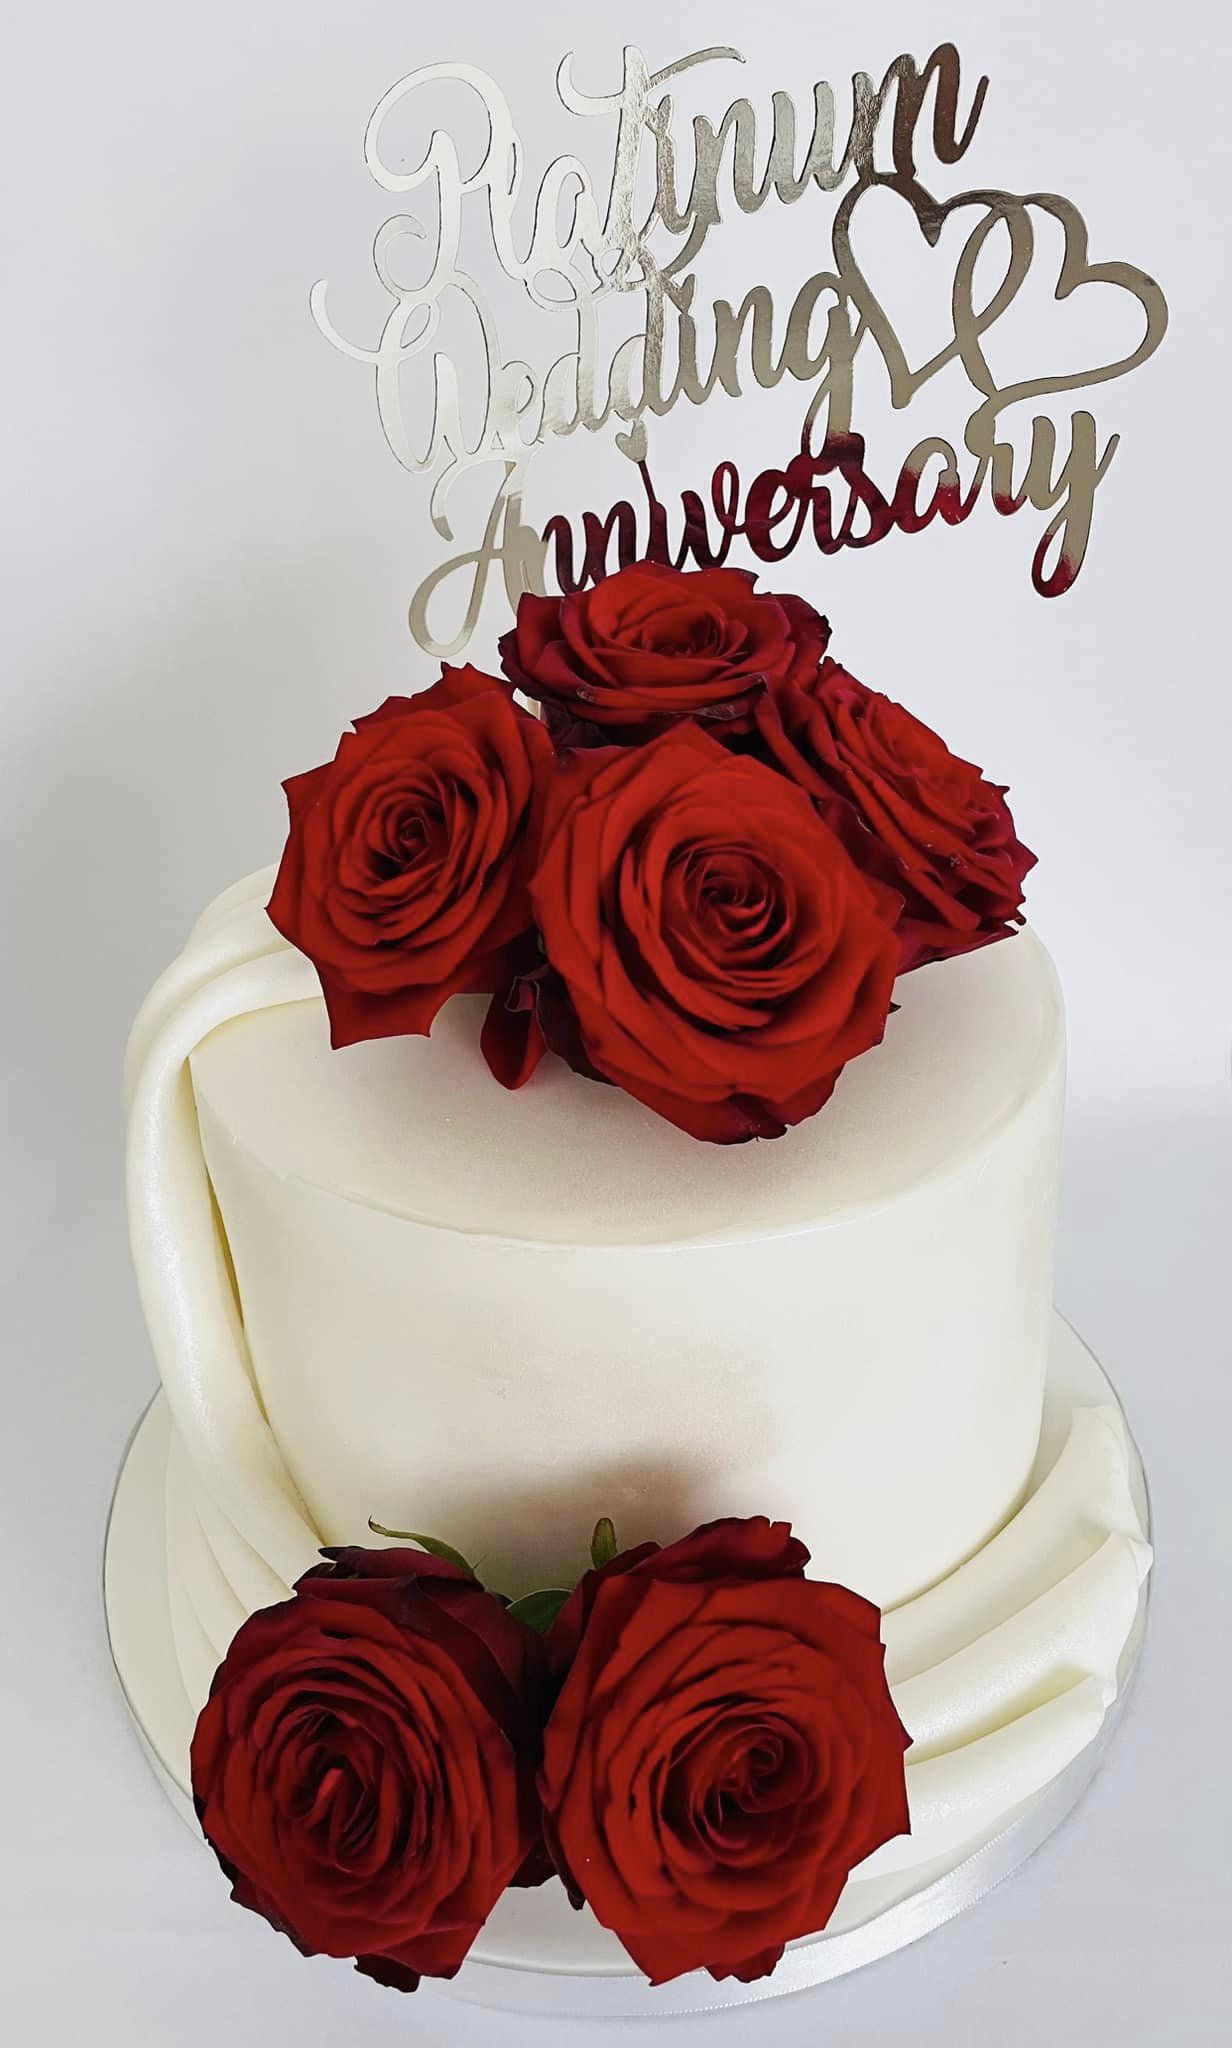 red roses on a cream white cake.